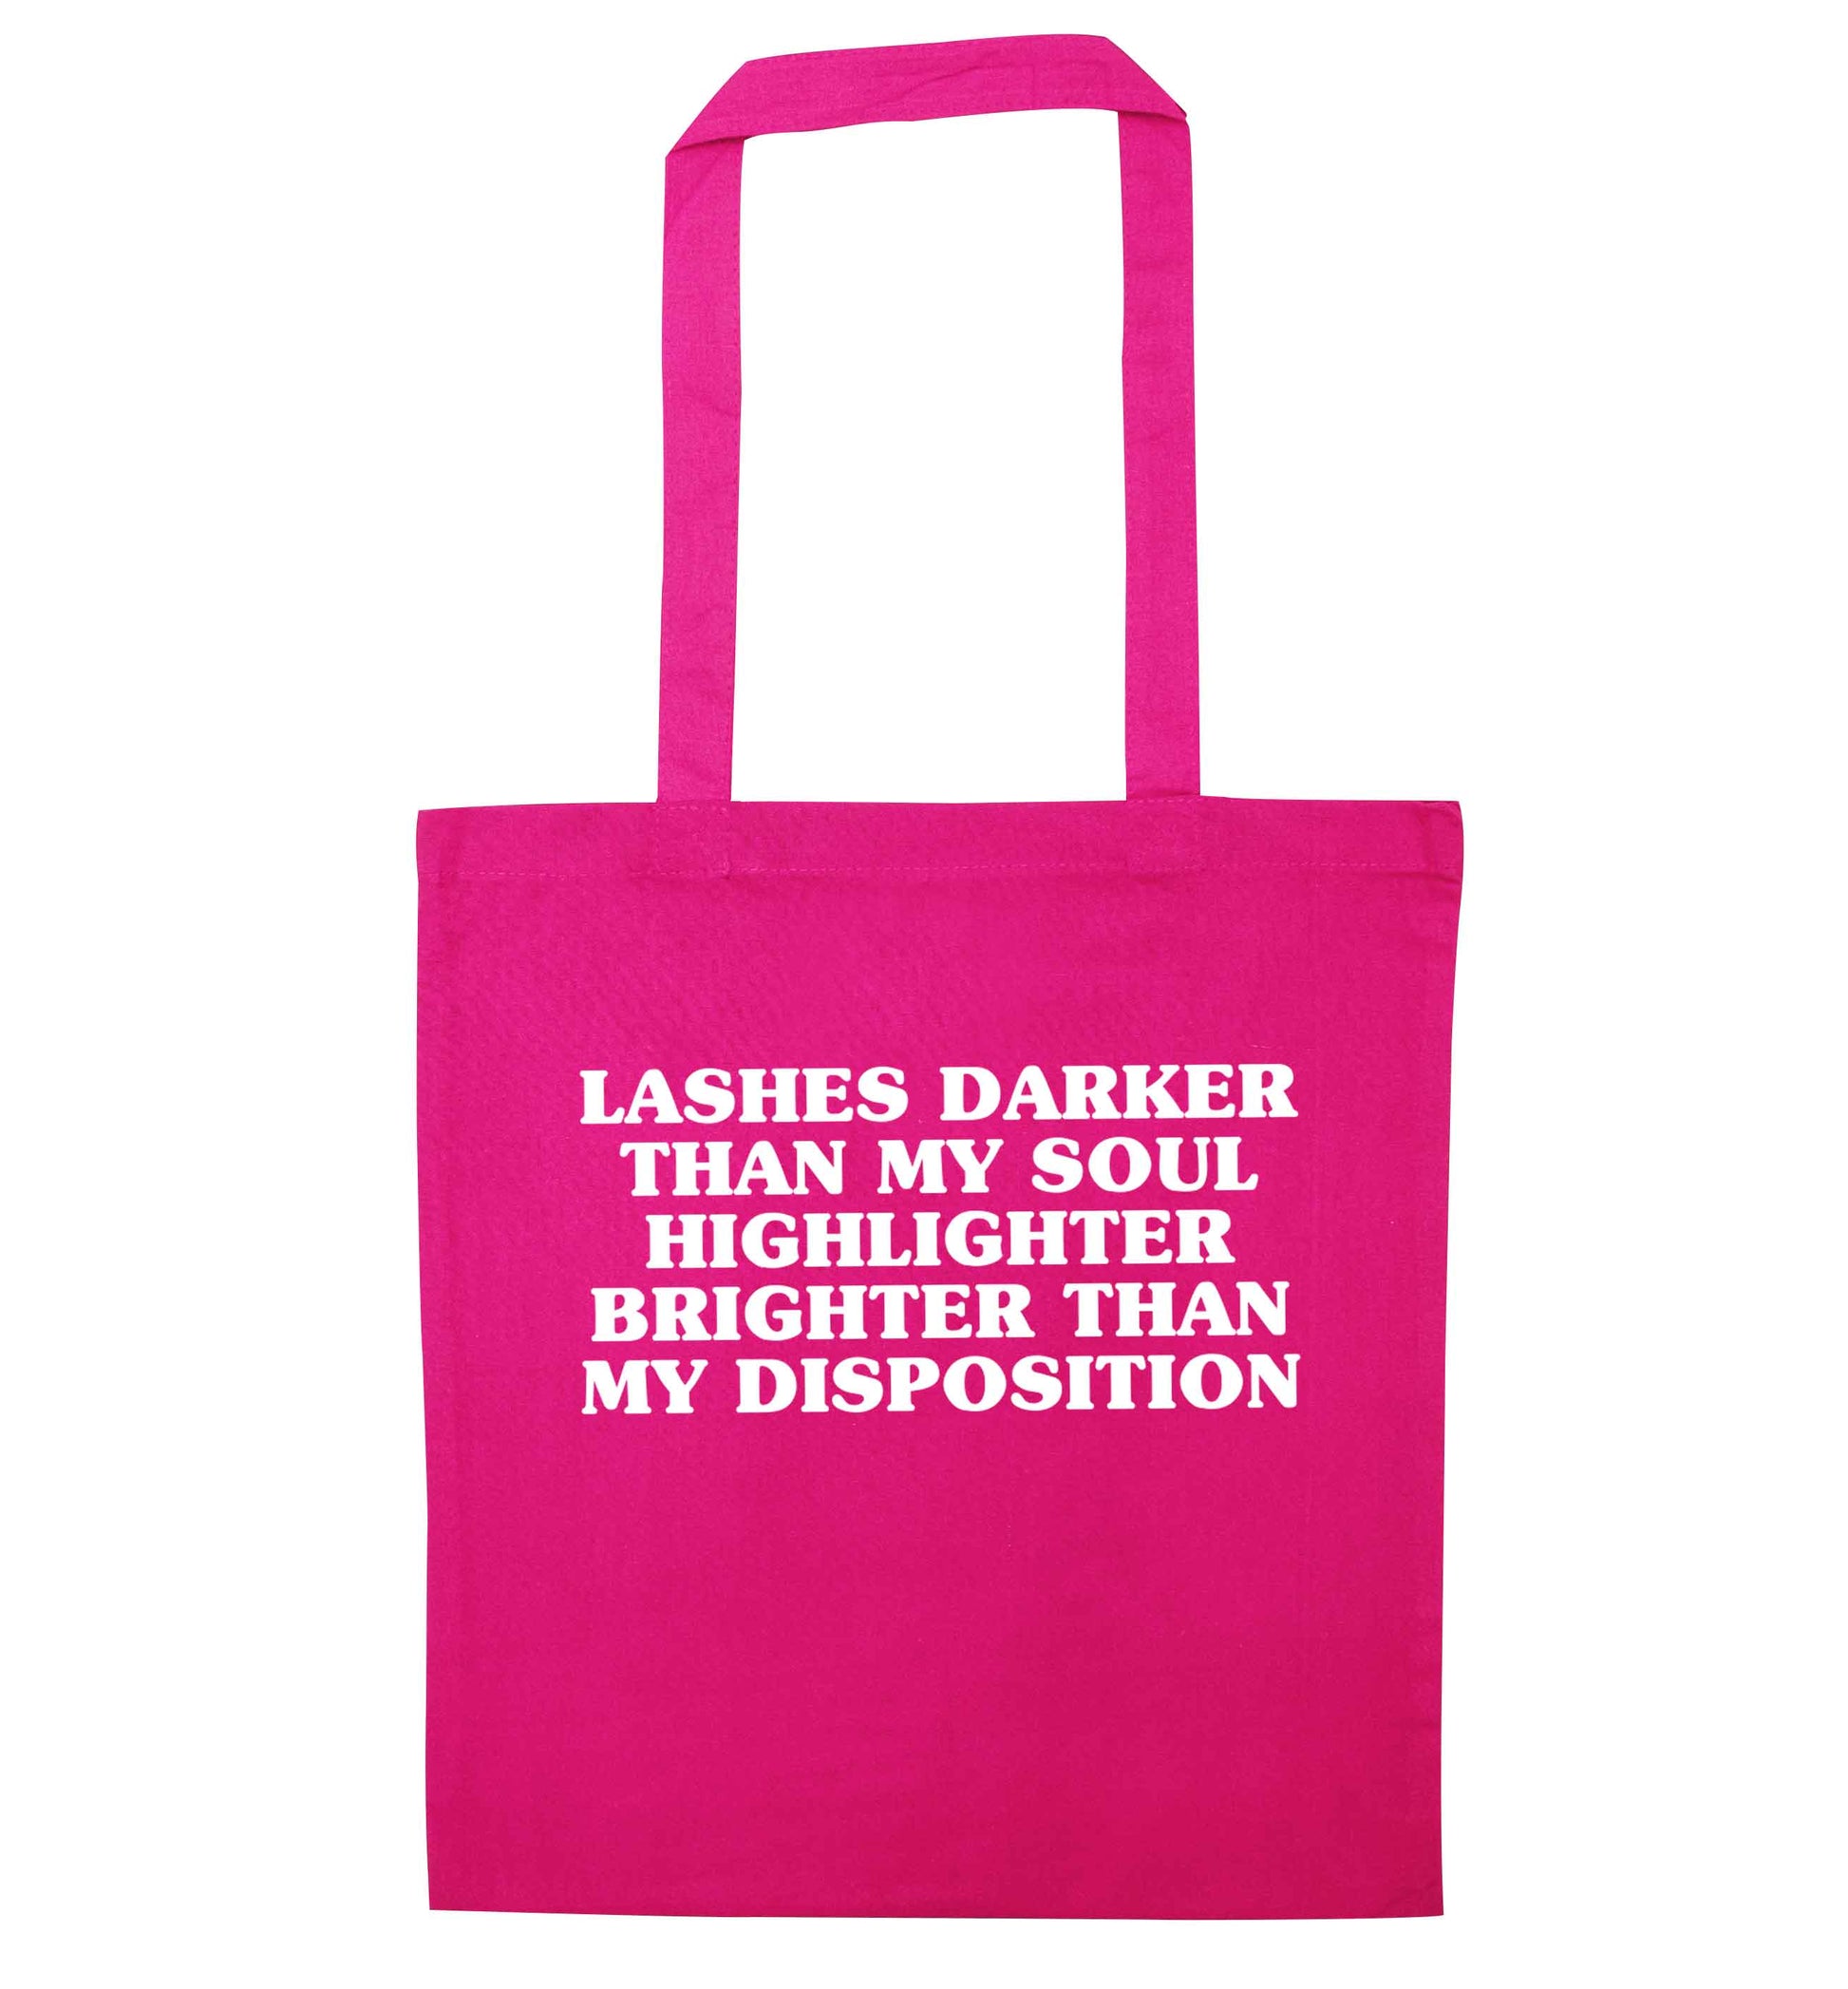 Lashes darker than my soul, highlighter brighter than my disposition pink tote bag